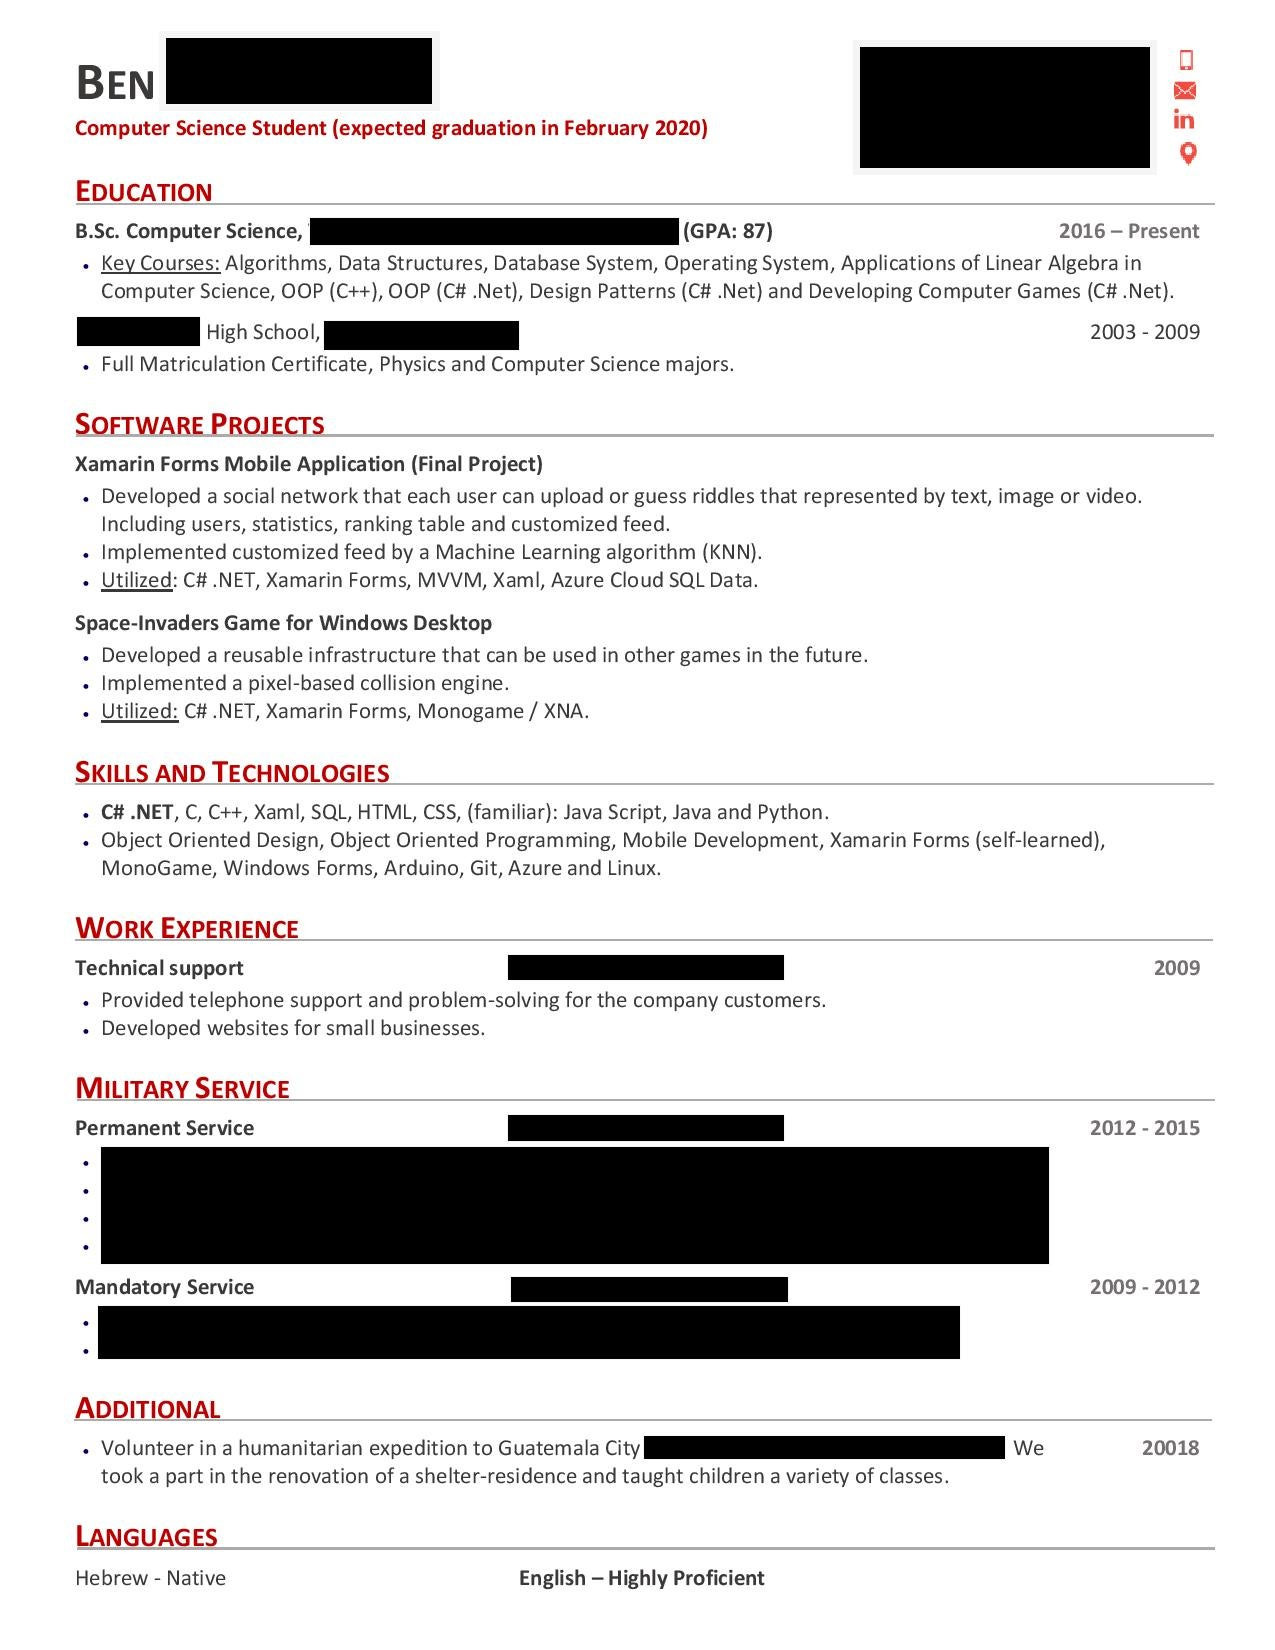 Sample Resume for Computer Science Fresh Graduate Reddit Fresh Computer Science Graduate Resume. : R/resumes